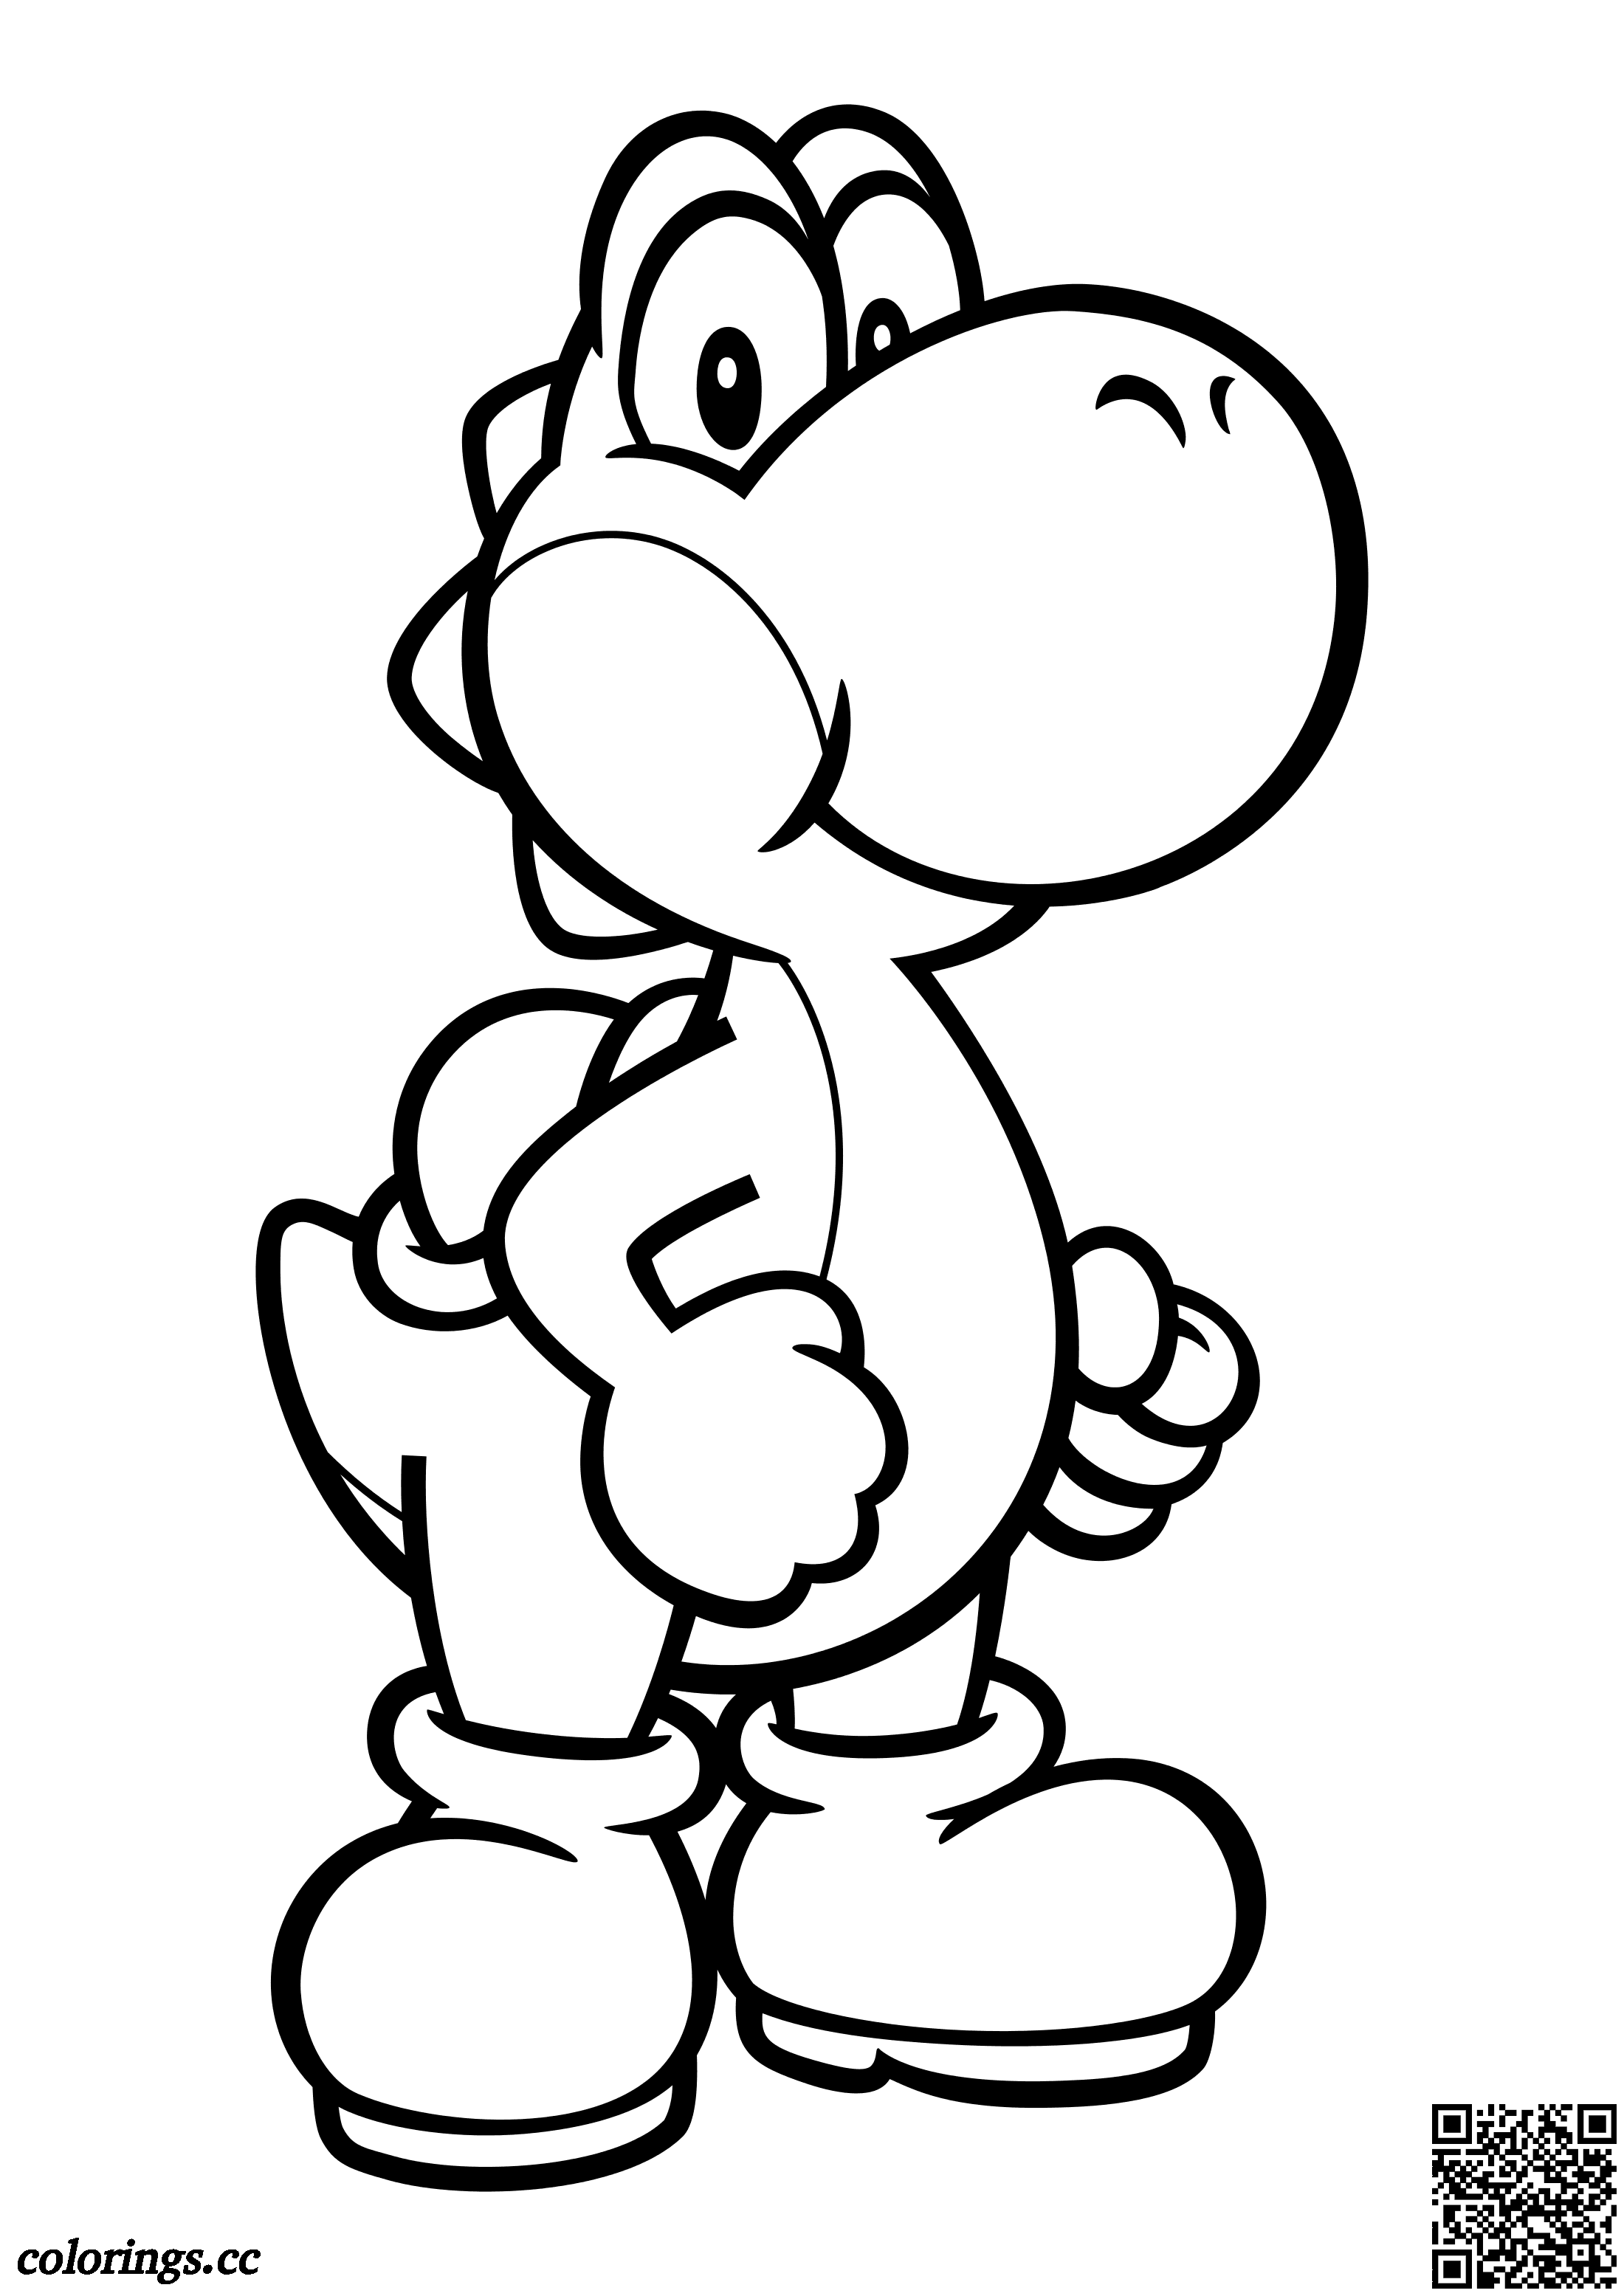 Dinosaur Yoshi coloring pages, Super Mario coloring pages ...